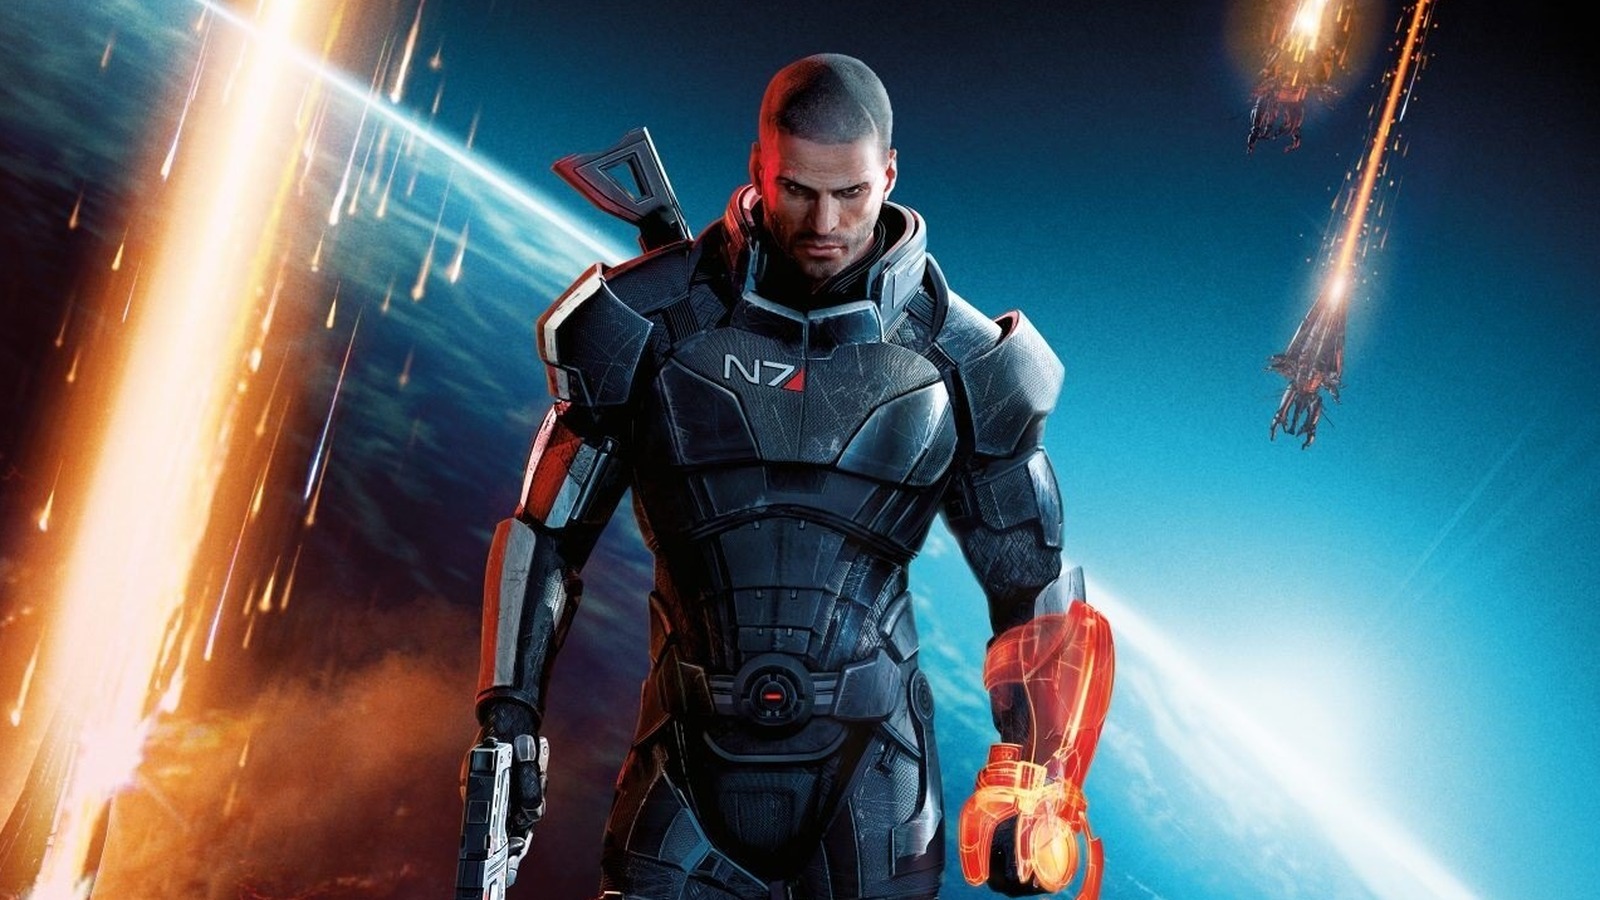 Noted Gamer Henry Cavill Would Like To Talk About Starring In A Mass Effect Adaptation